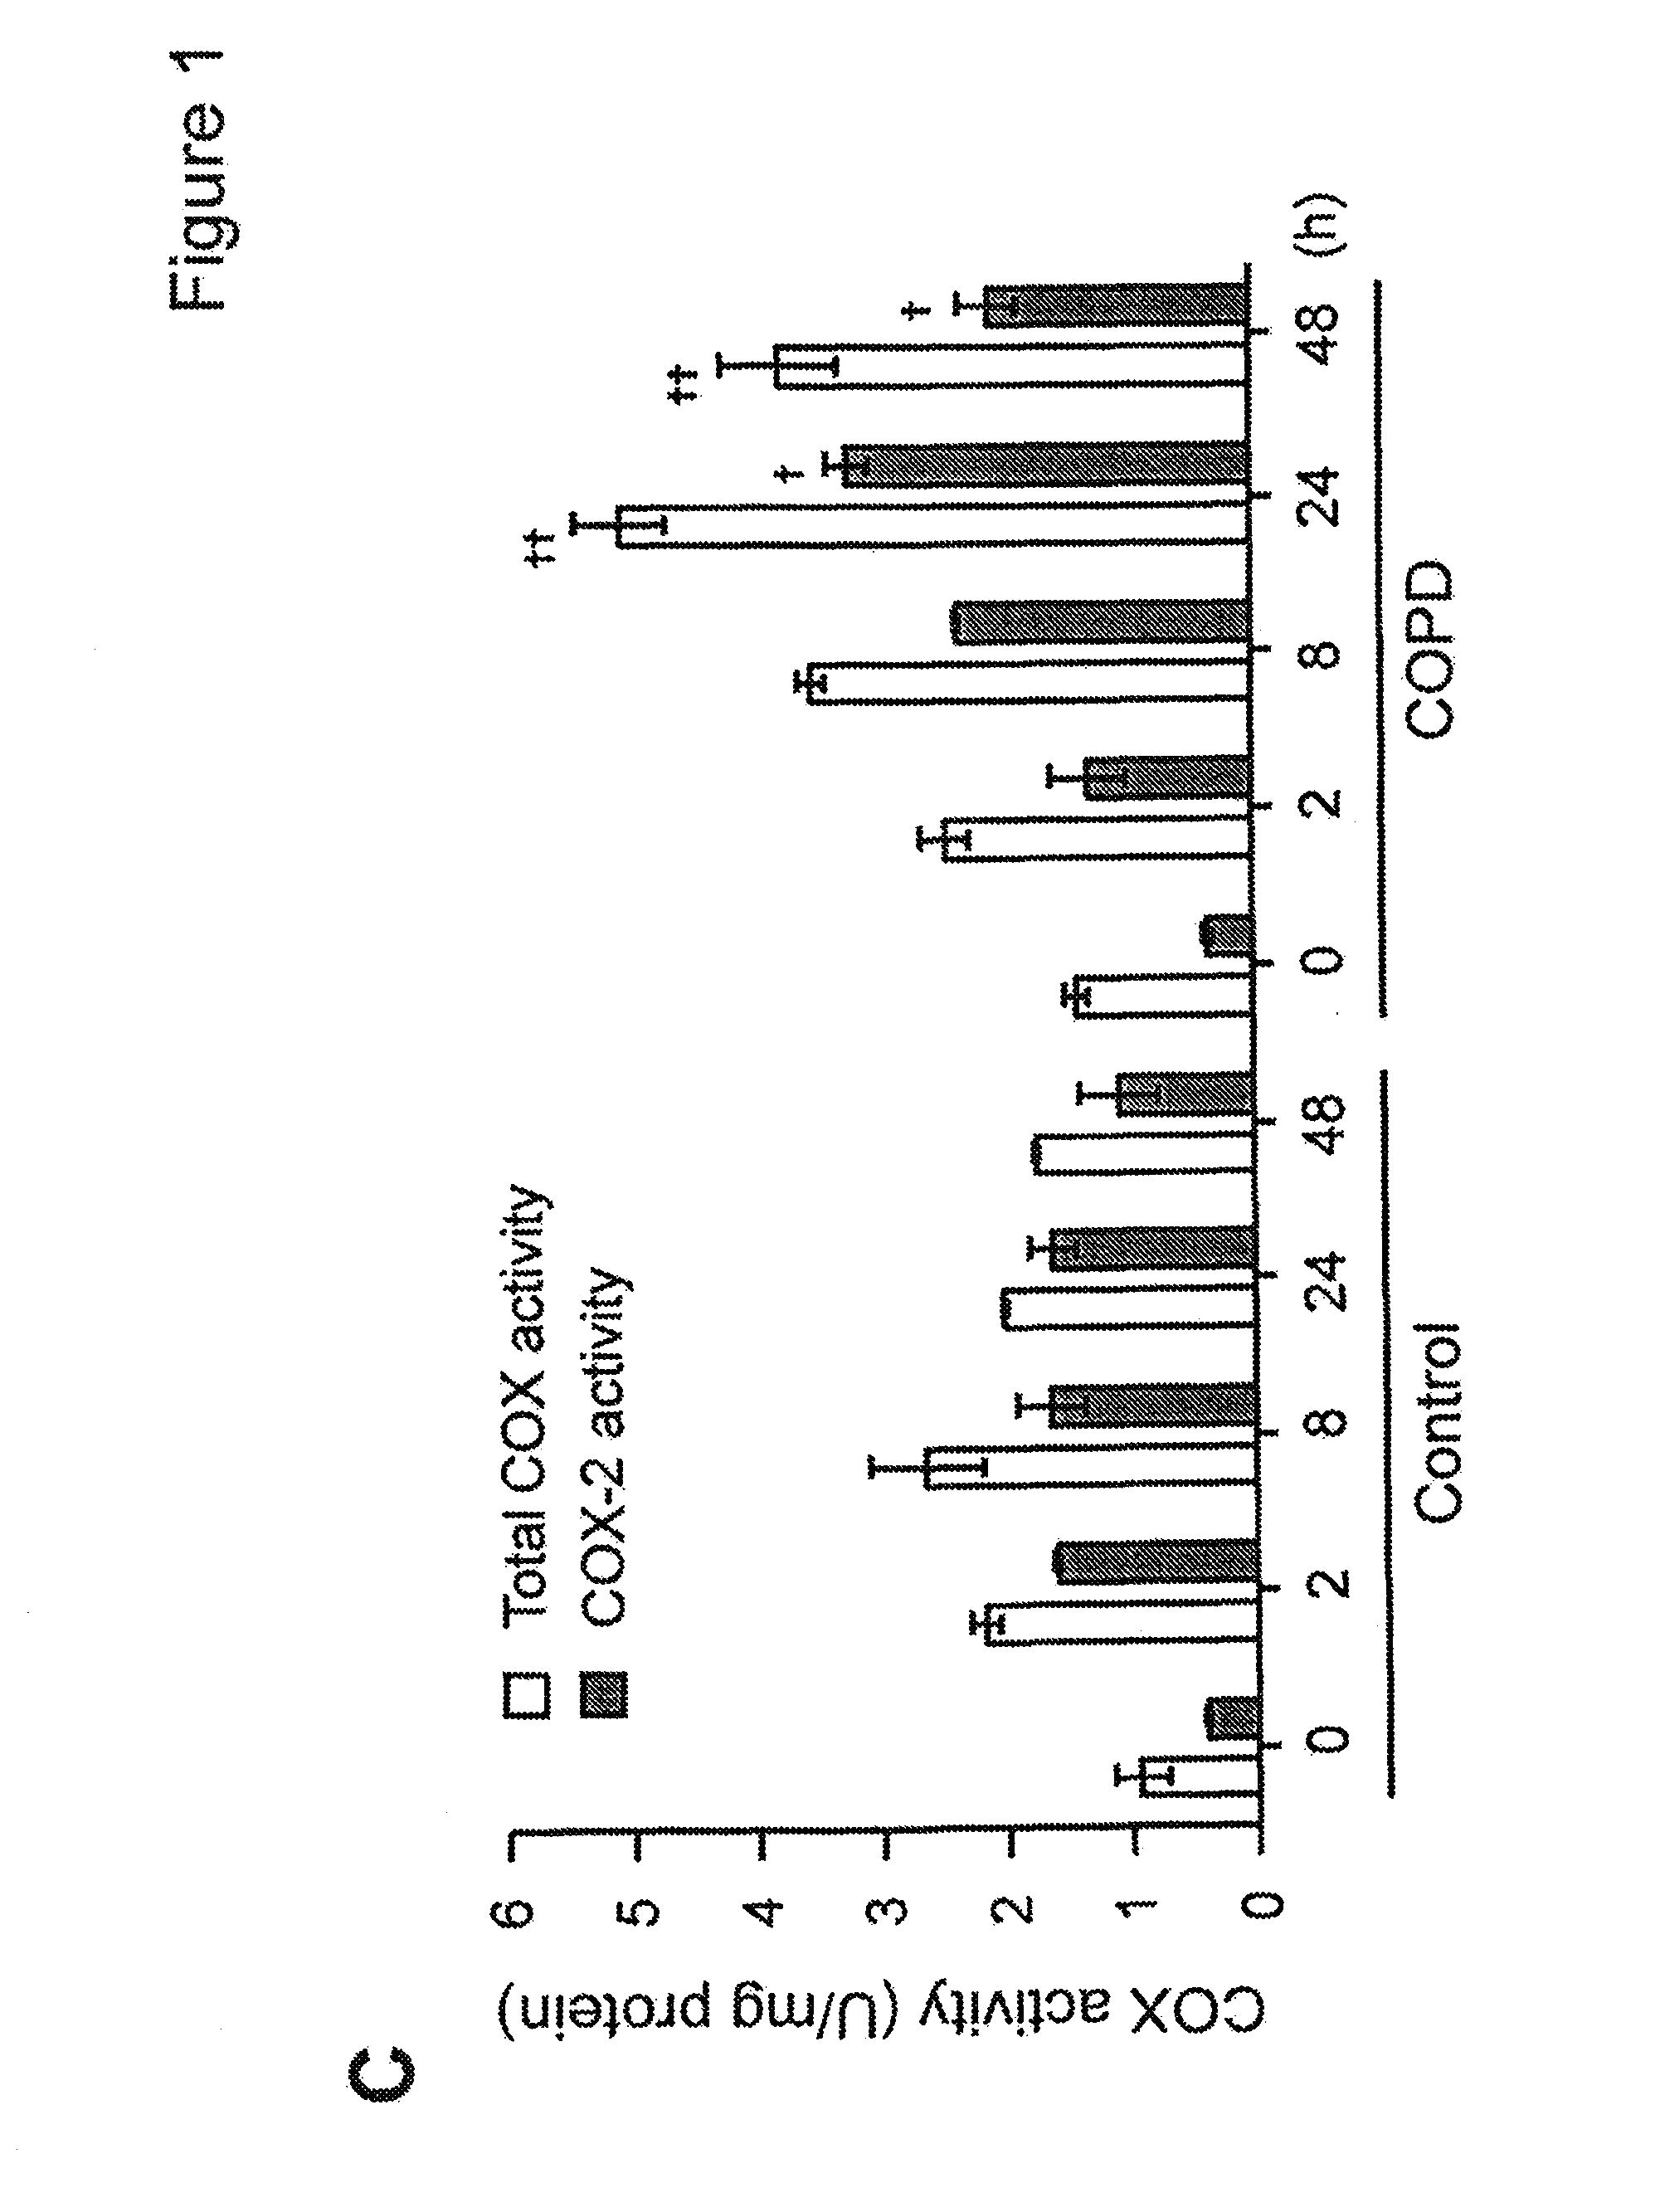 Compositions and methods for the diagnosis and treatment of inlammatory disorders and fibrotic disease